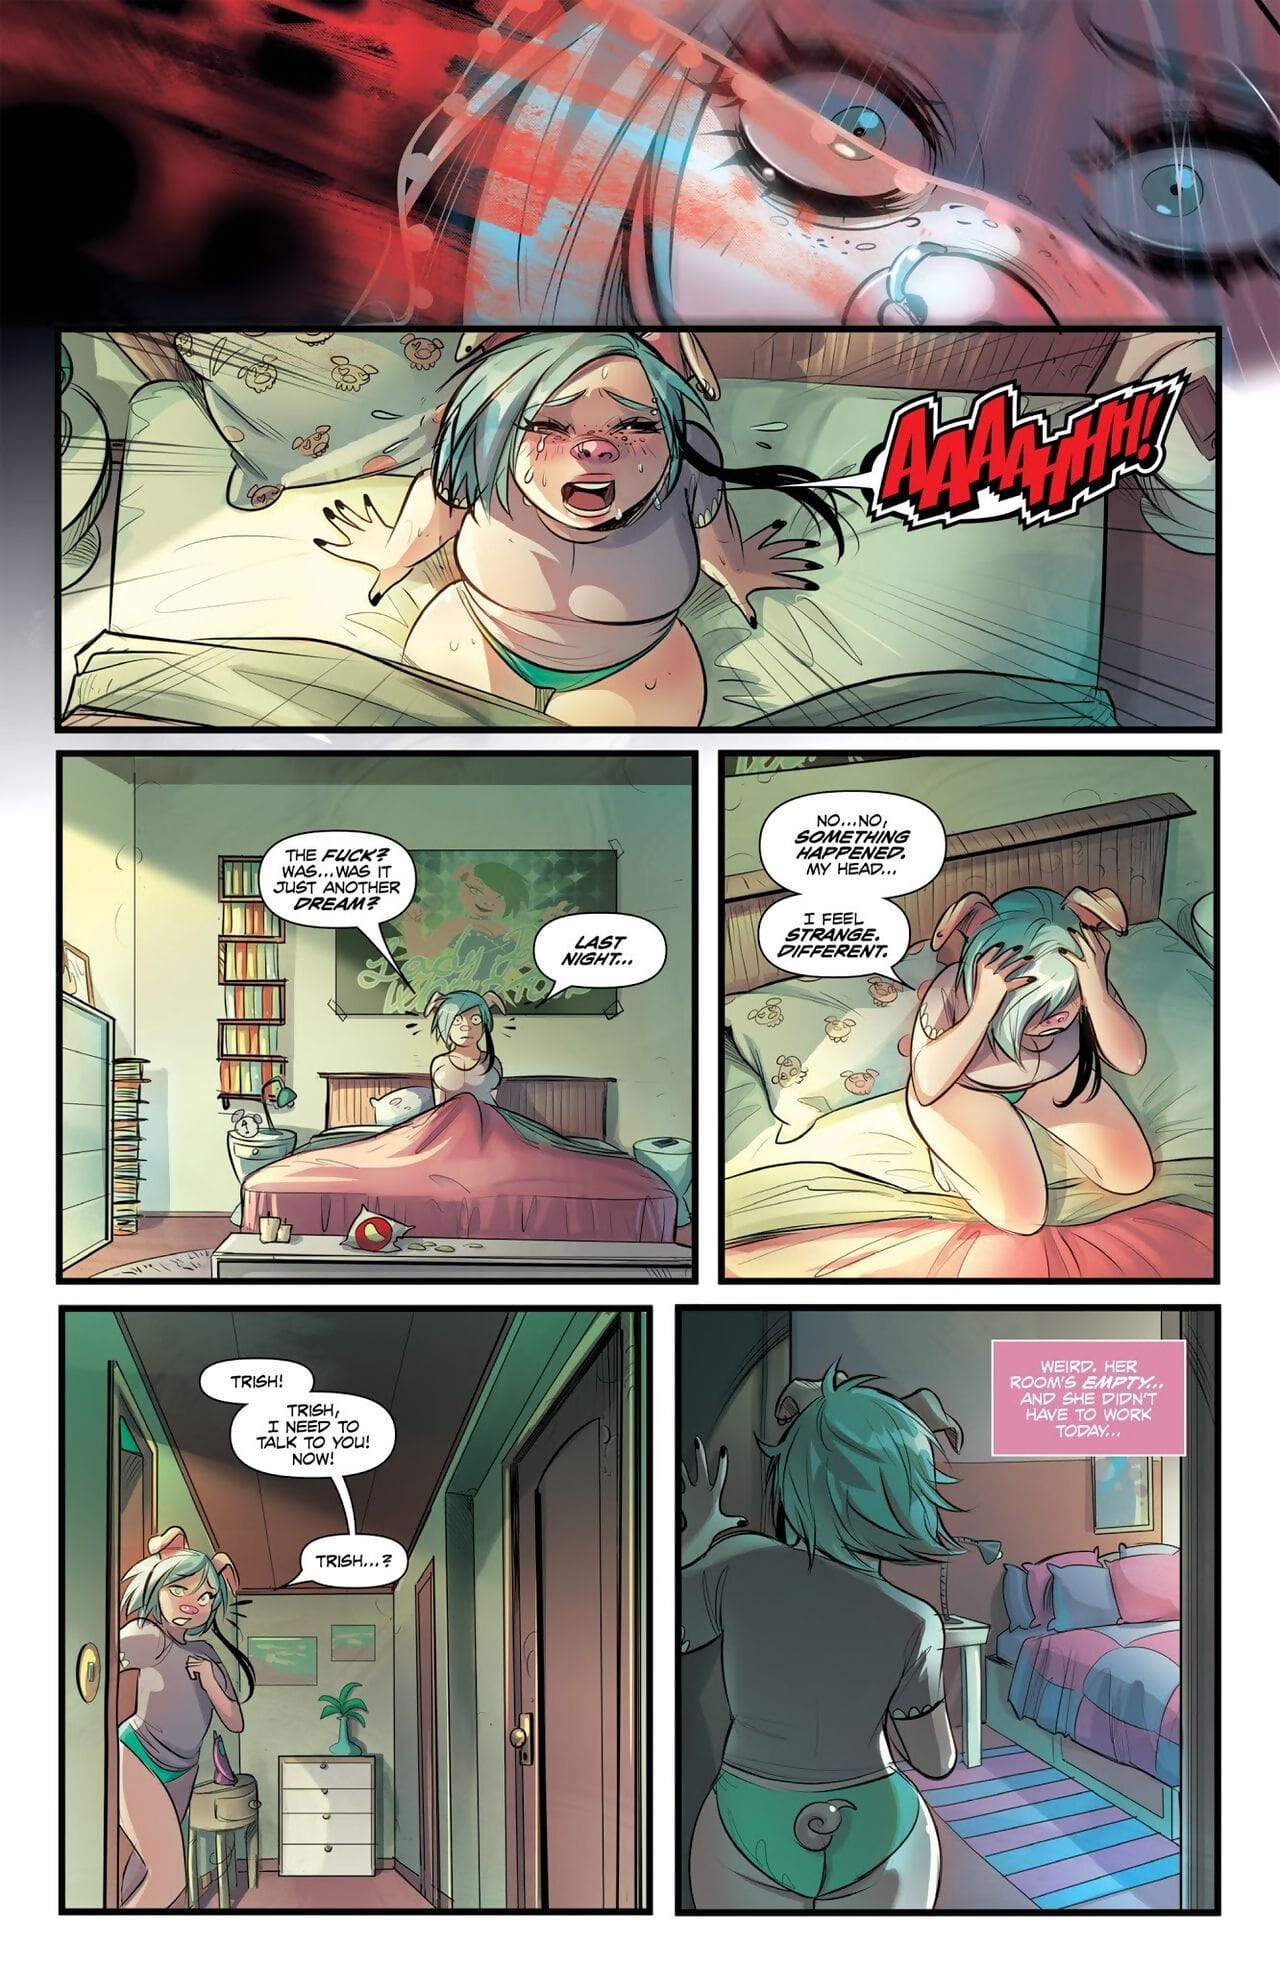 Unnatural - Issue 3 page 1